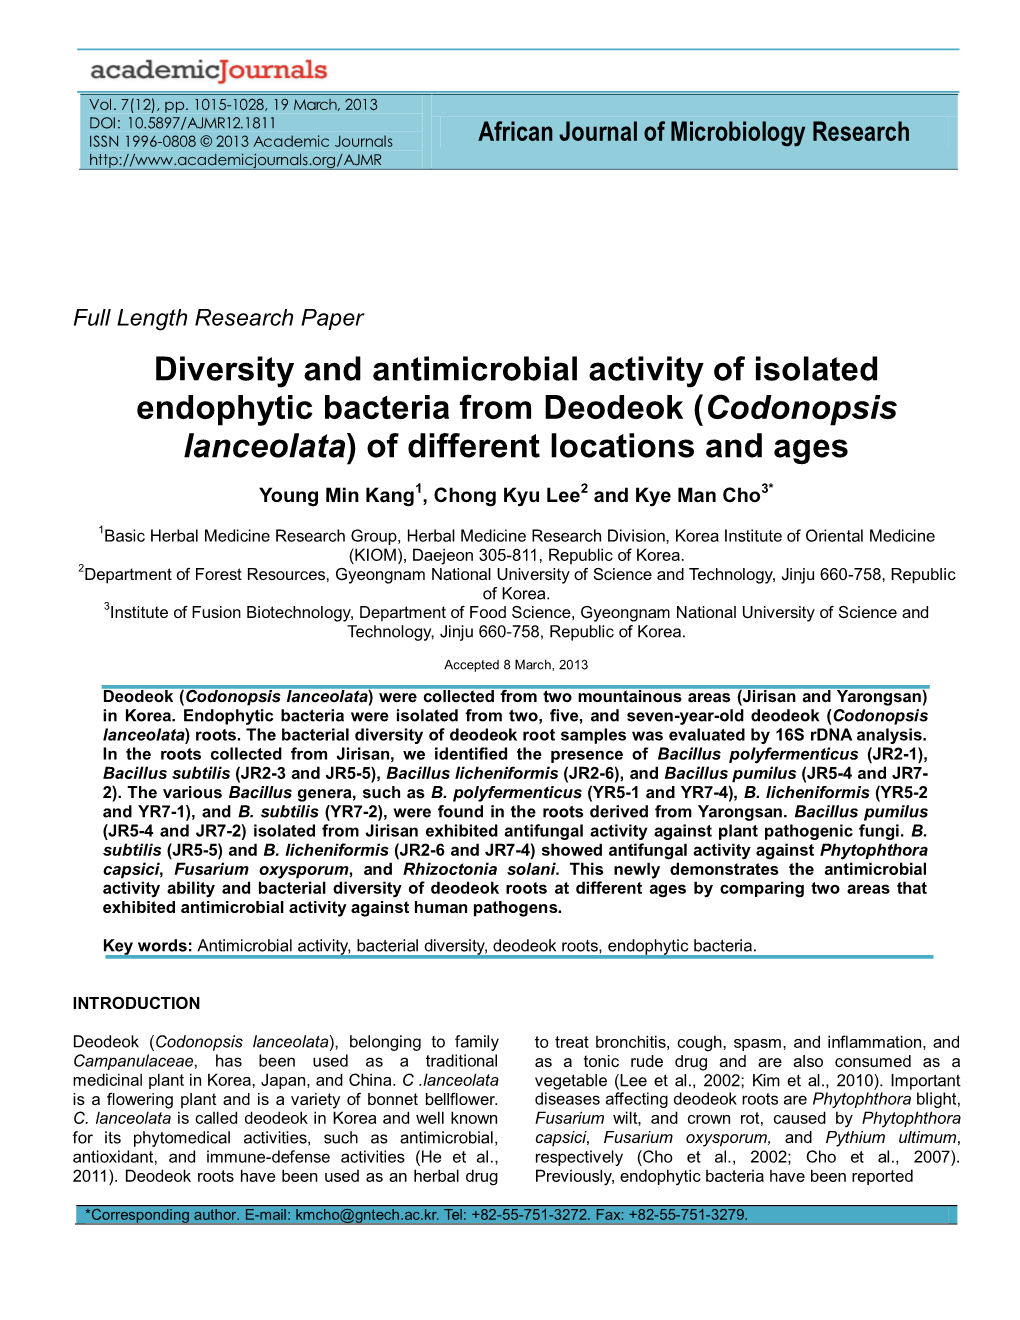 Diversity and Antimicrobial Activity of Isolated Endophytic Bacteria from Deodeok (Codonopsis Lanceolata) of Different Locations and Ages